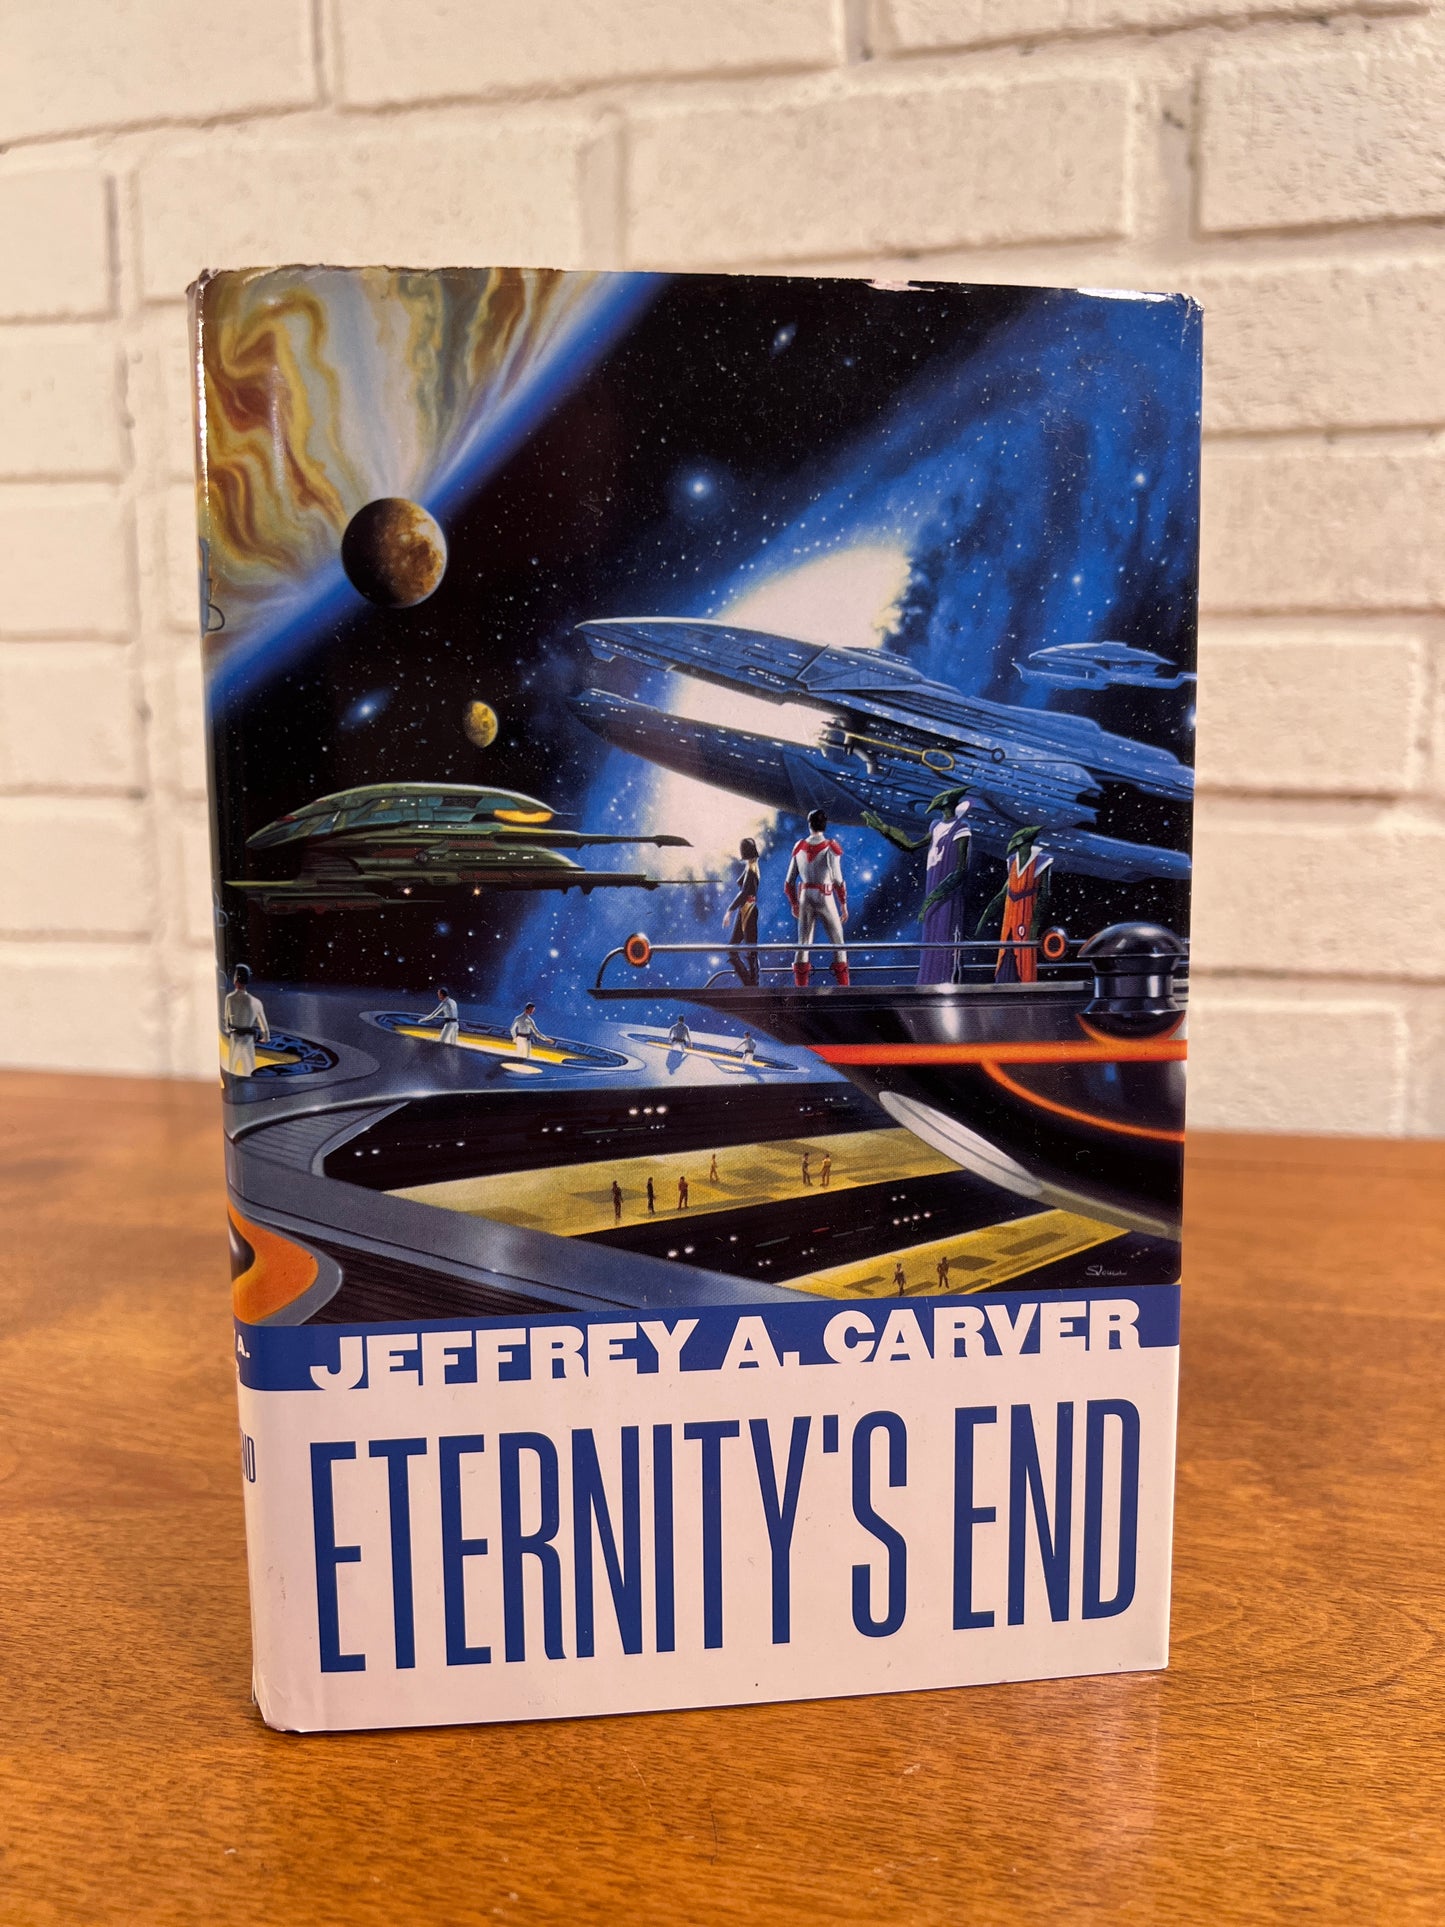 Eternity's End by Jeffrey A. Carver